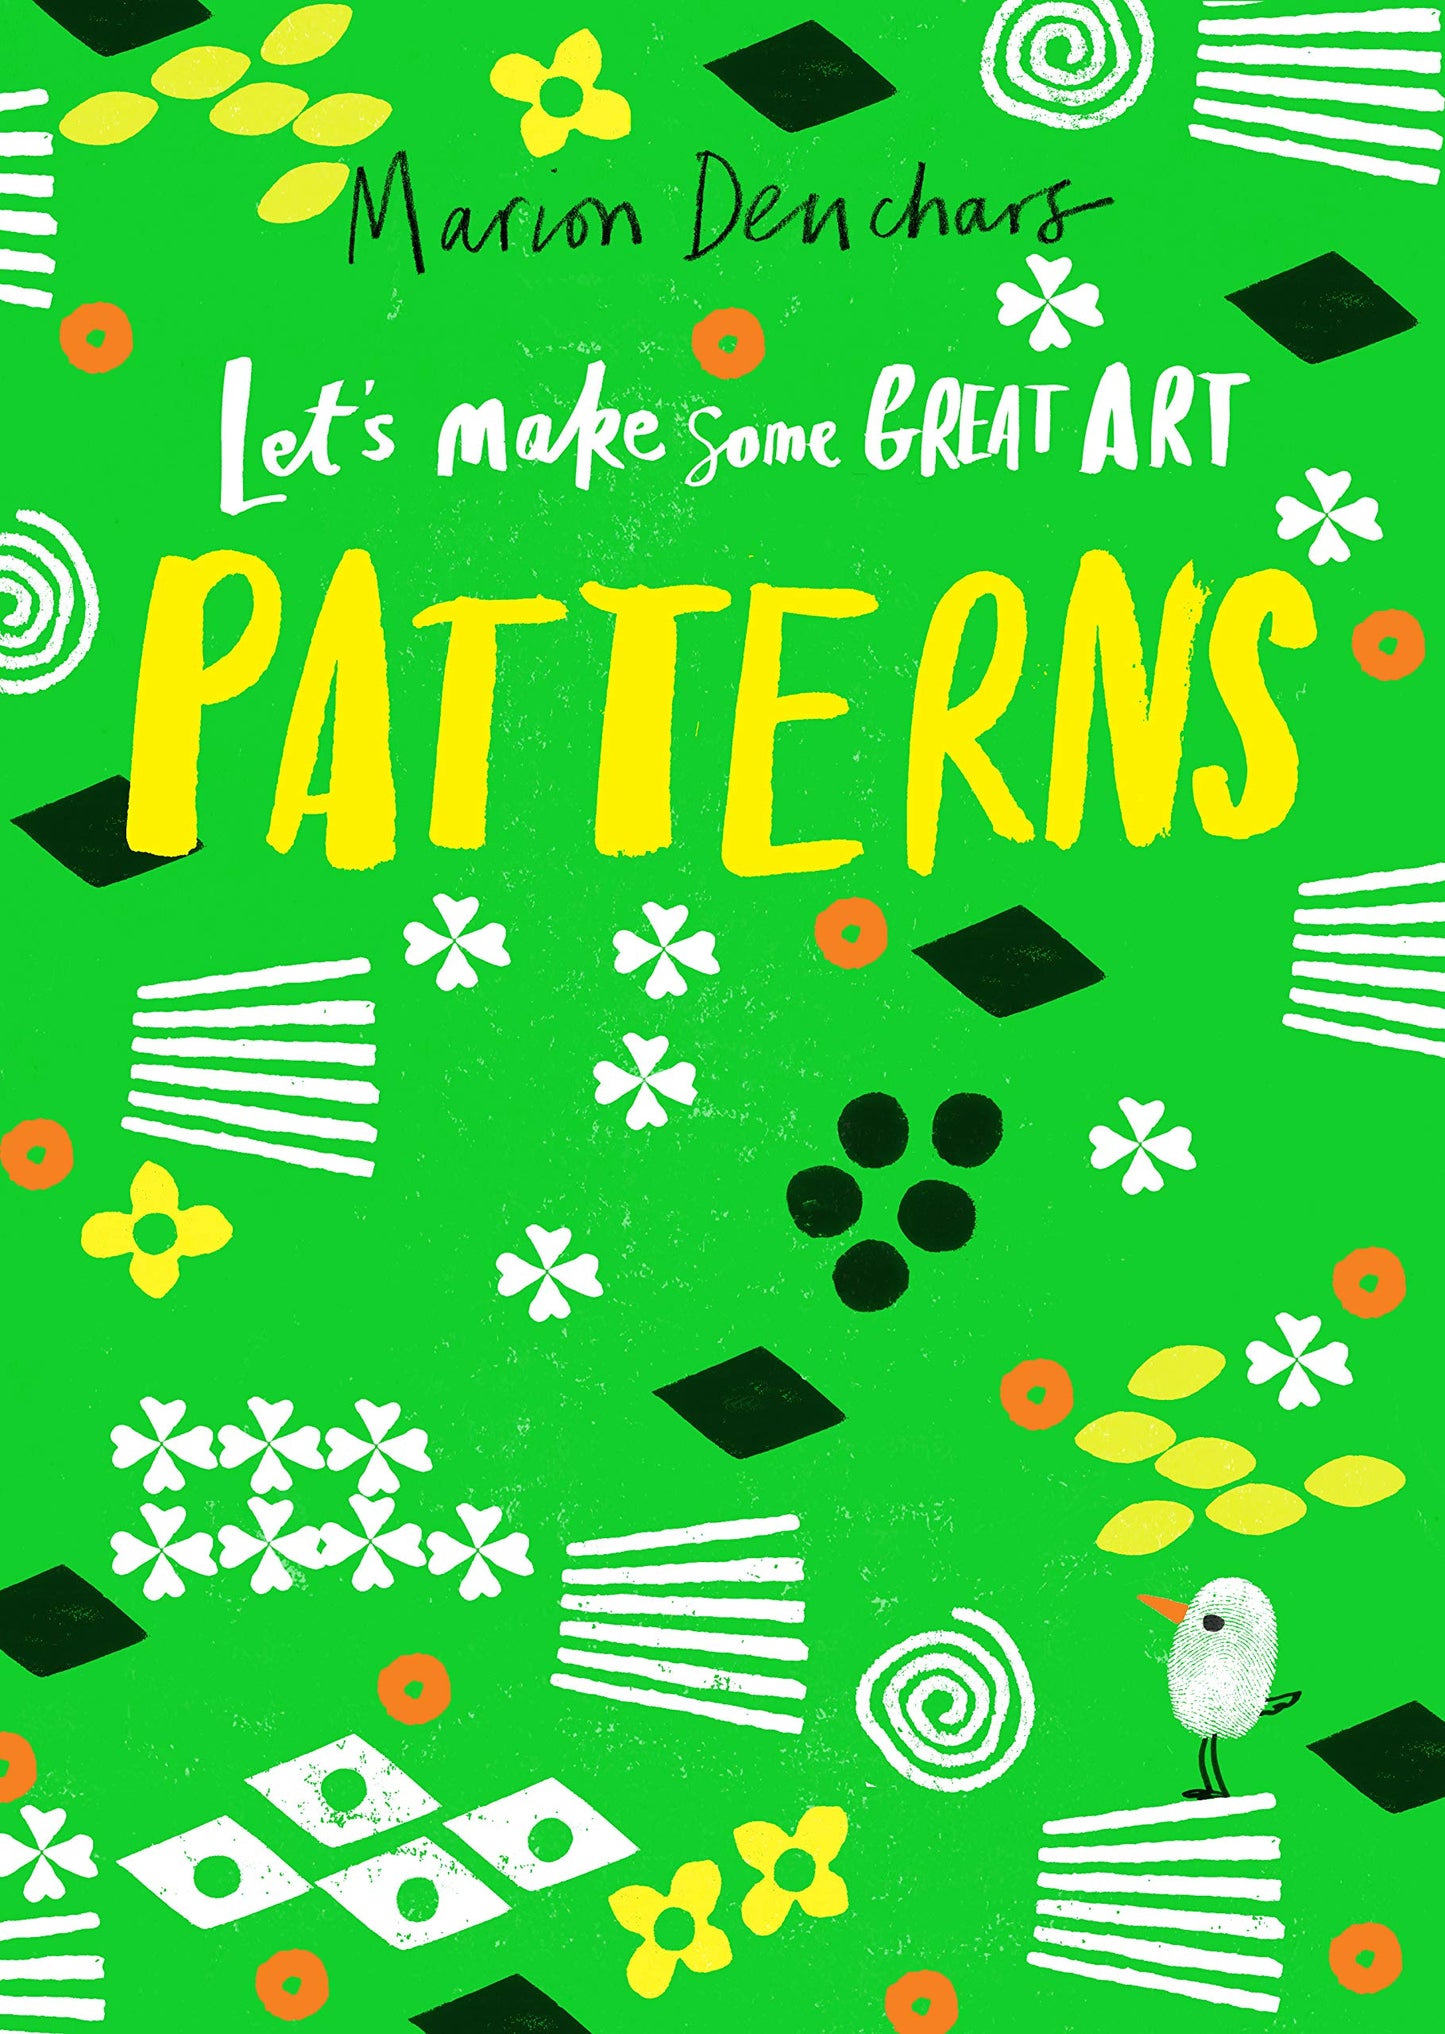 Lets Make Some Great Art: Patterns by Marion Deuchars